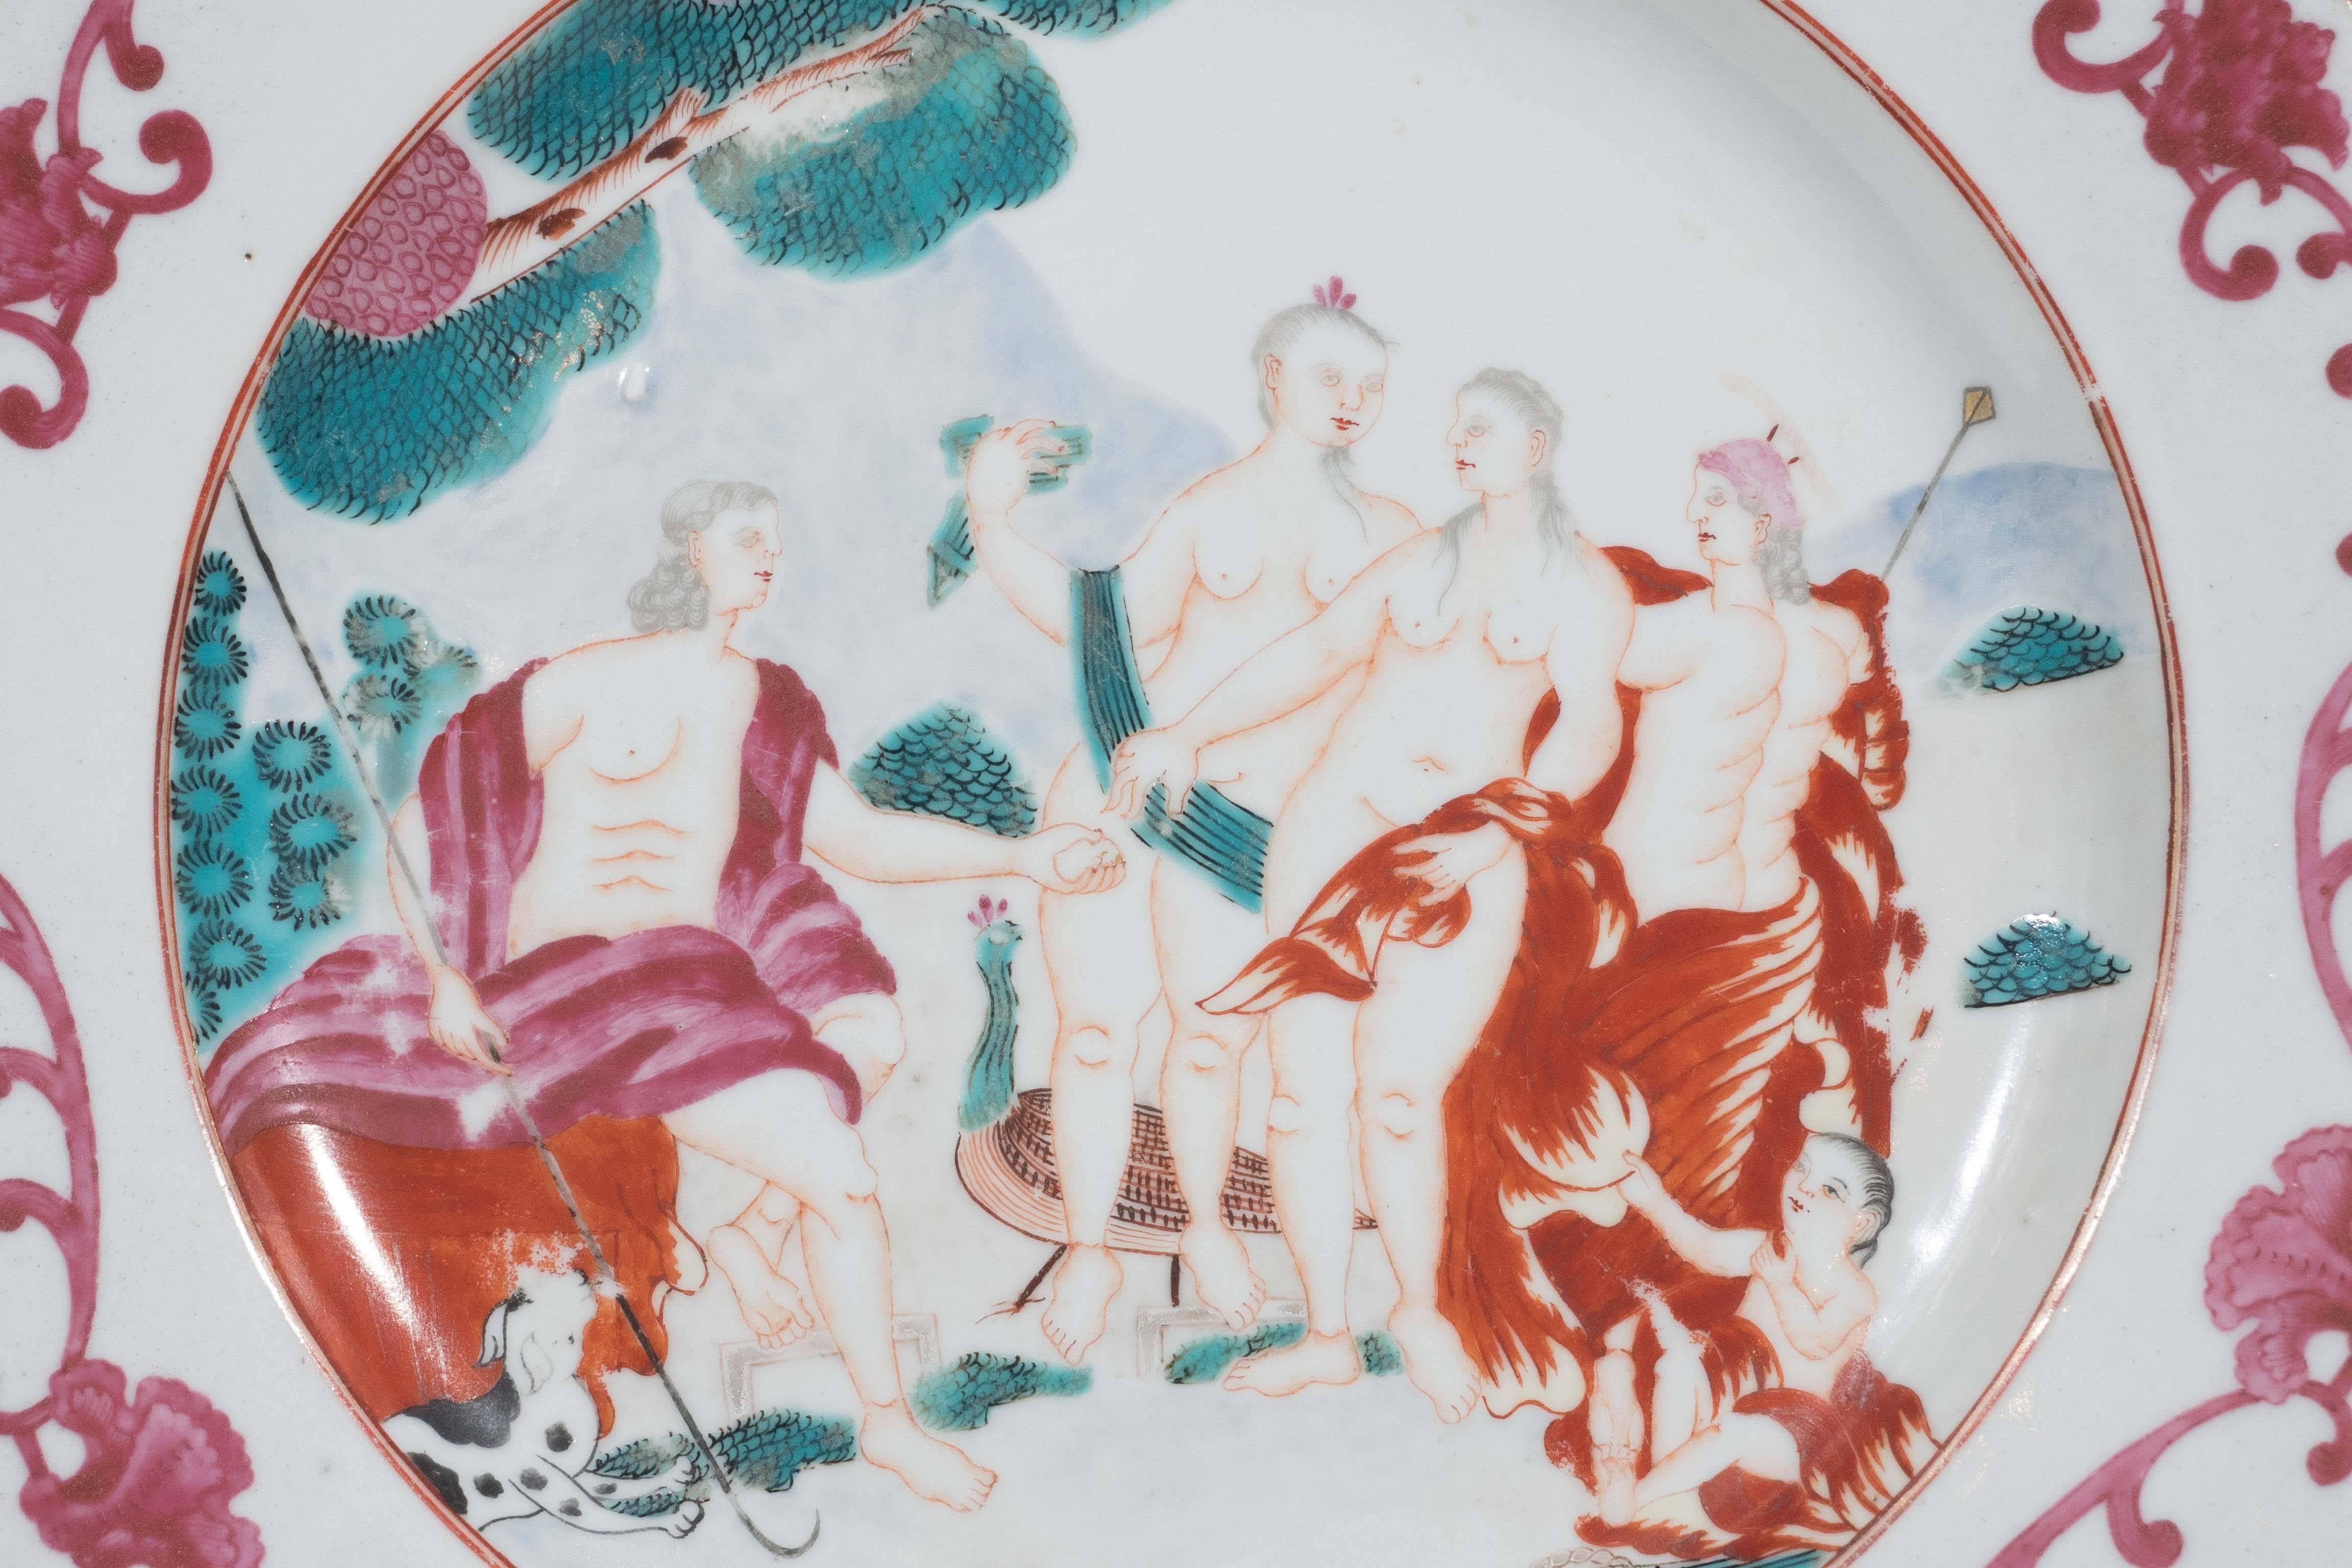 A rare Chinese Export plate showing the Judgement of Paris. The delicately painted figures derive from a painting by Jean Paul Rubens.
The plate was made during the Qianlong Reign, circa 1750. The scene shows Rubens' version of idealized feminine